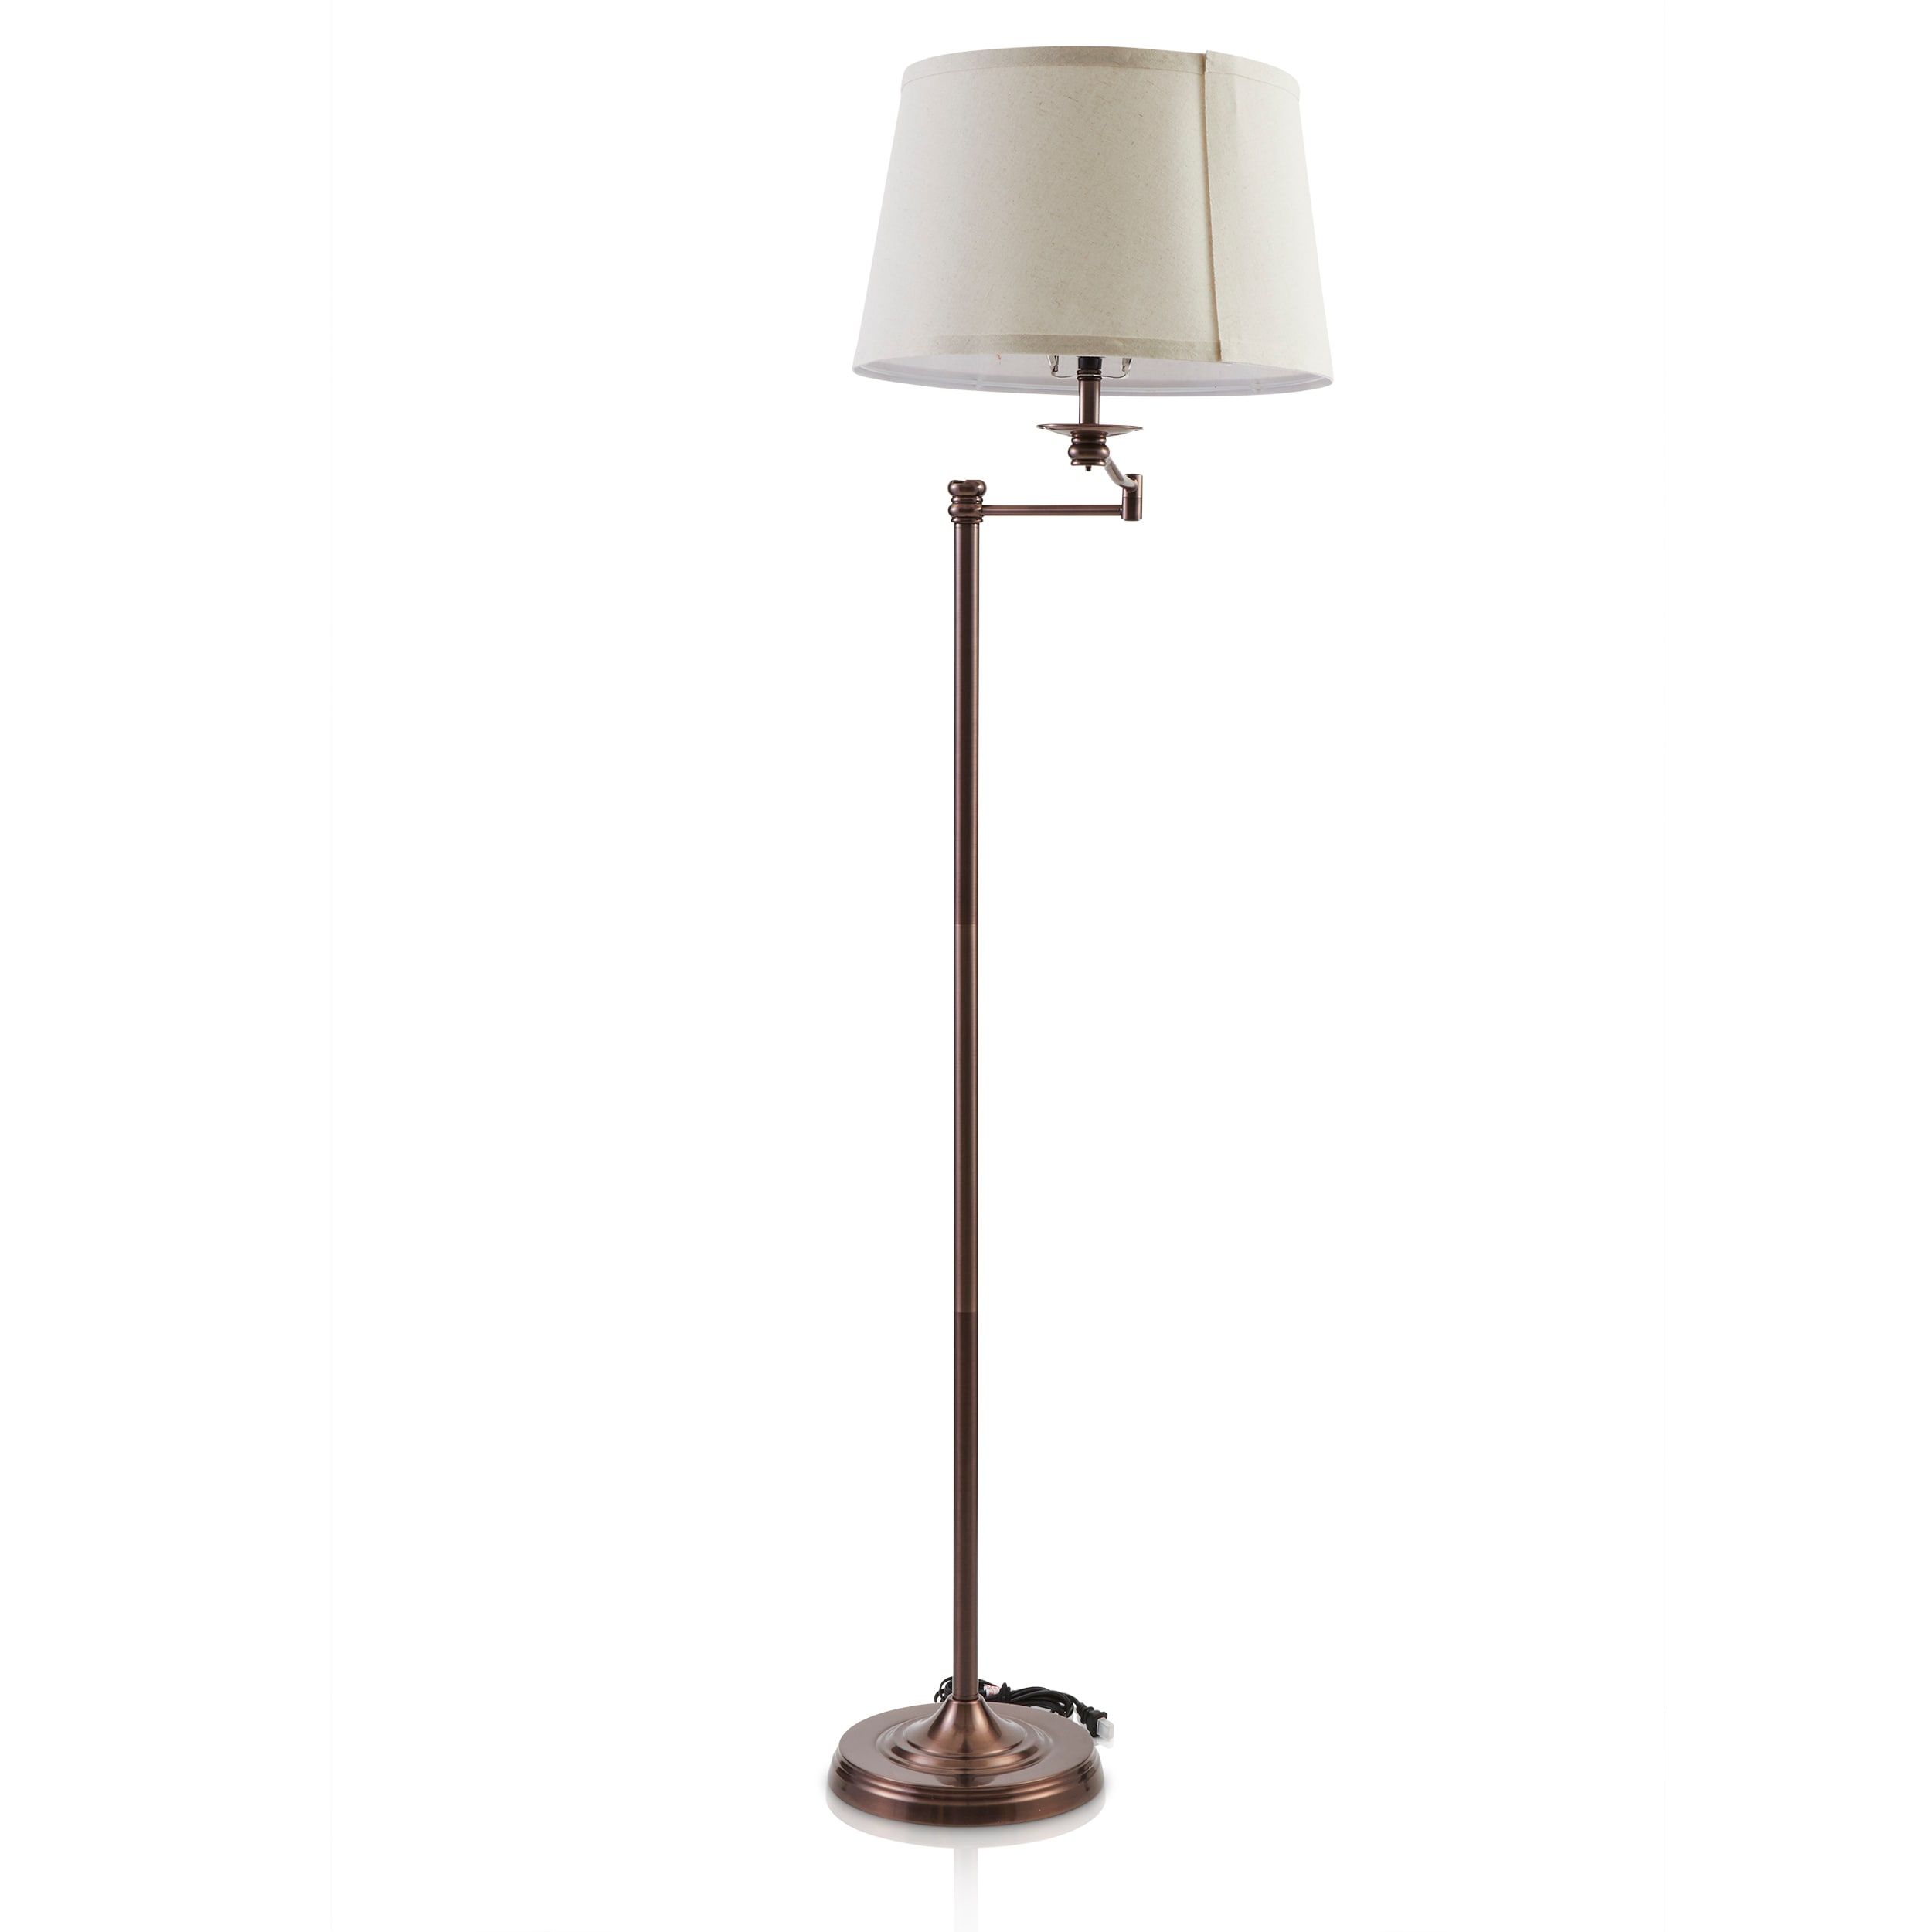 Macleay Floor Lamp Antique Brass With Black Shade